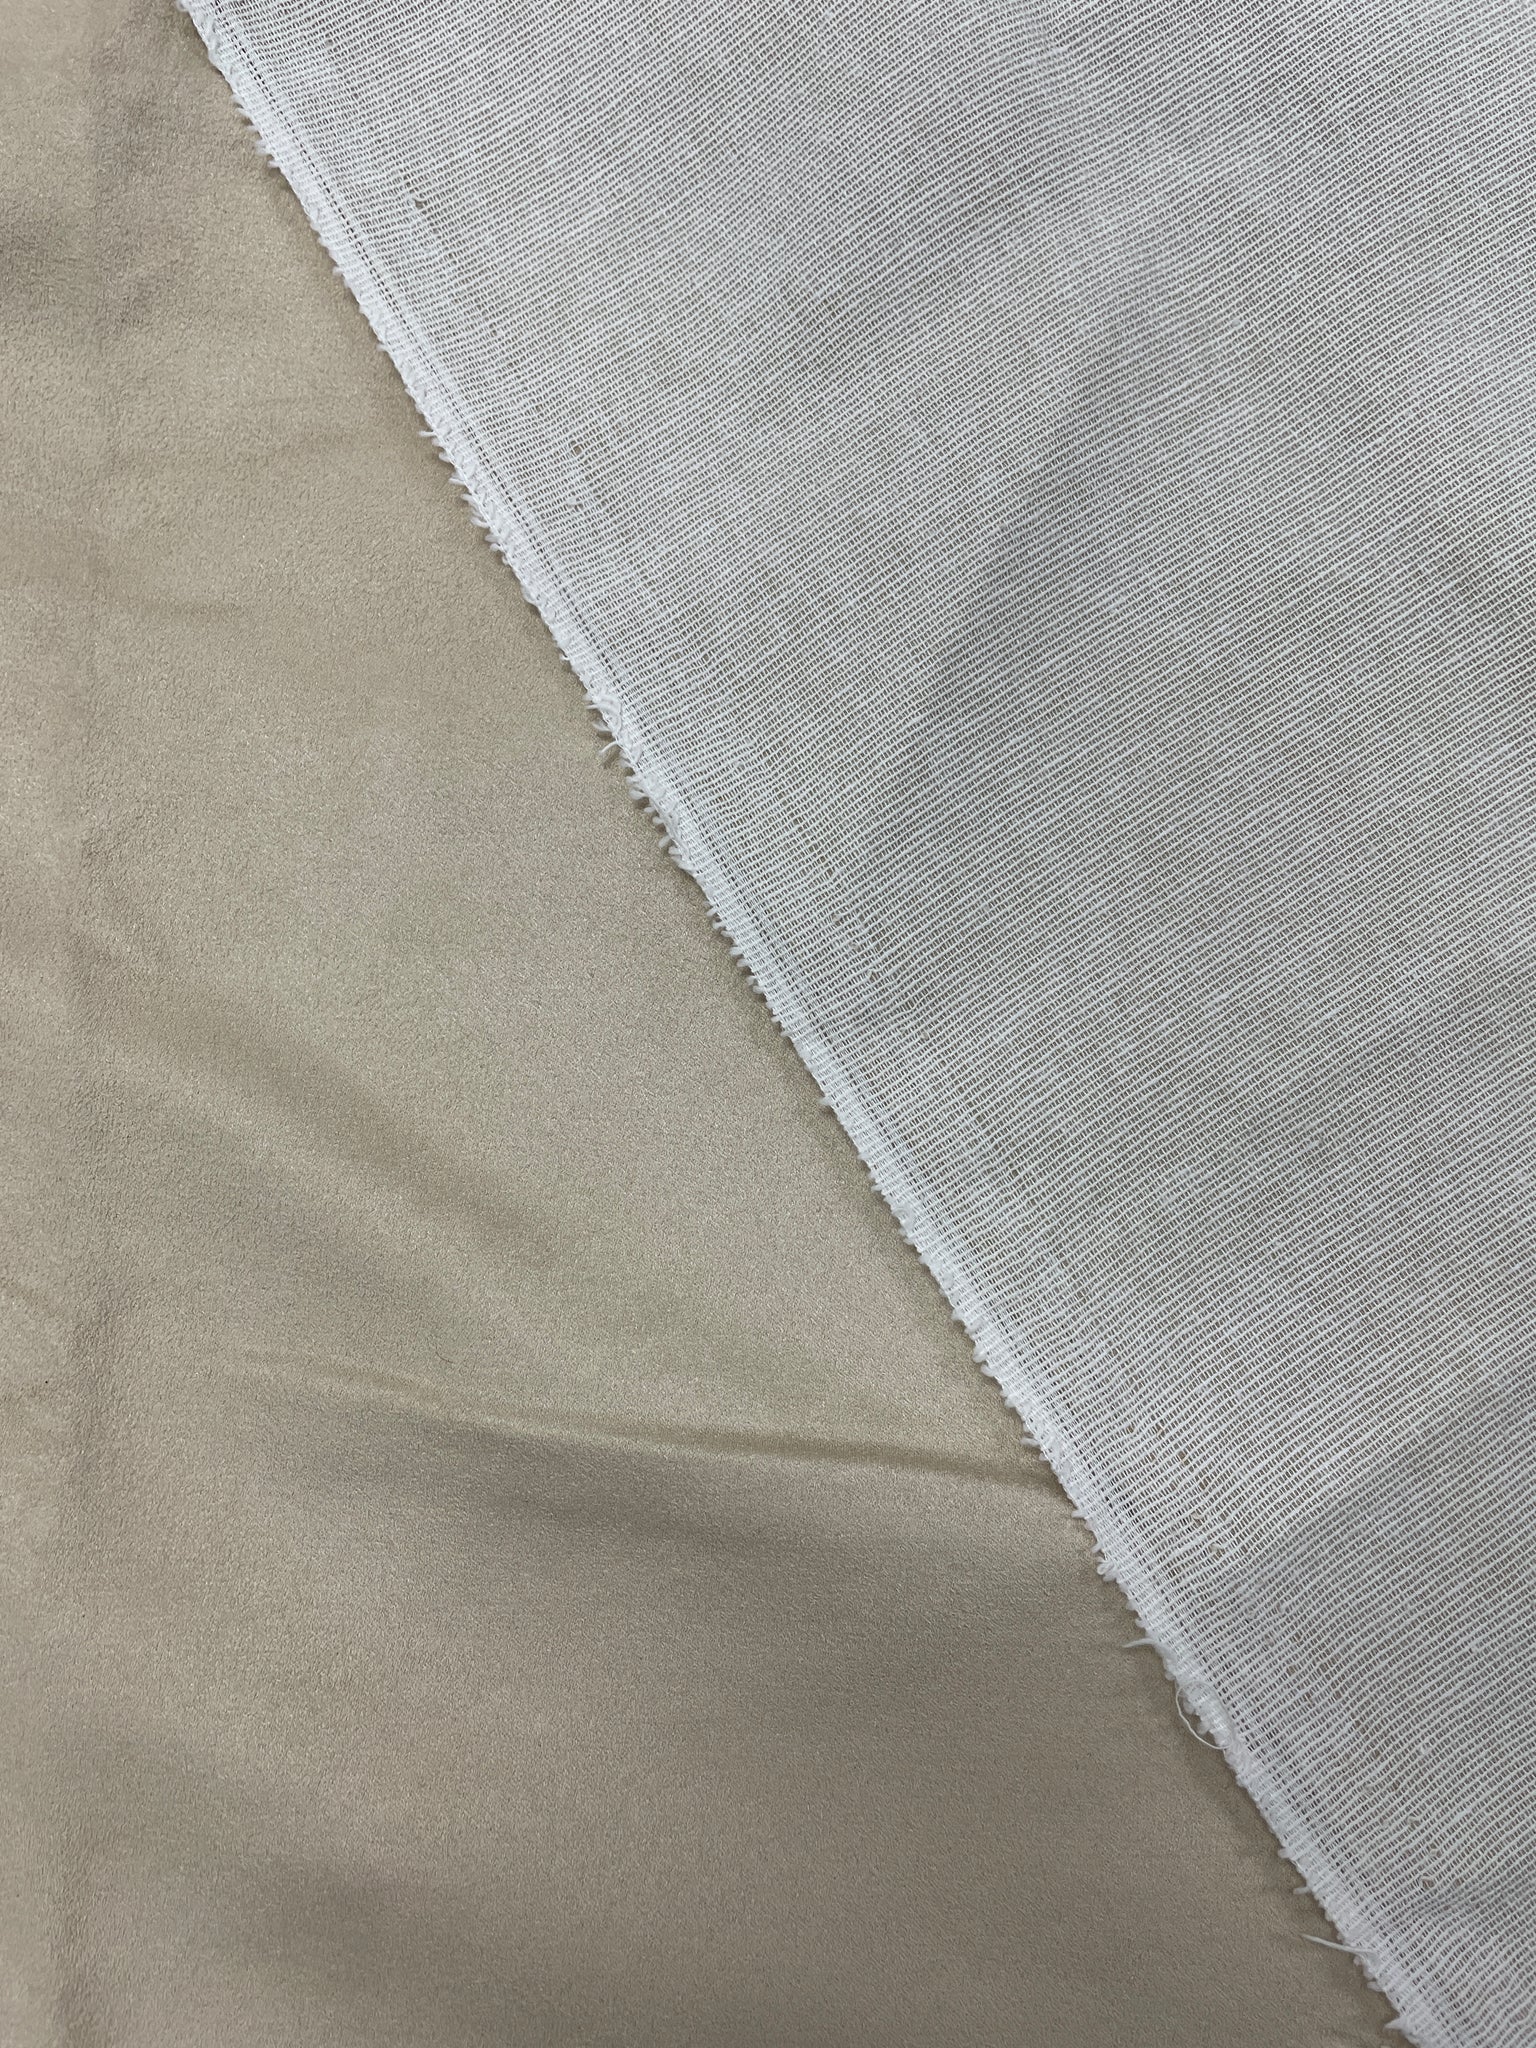 1 3/8 YD Polyester Microsuede - Cream